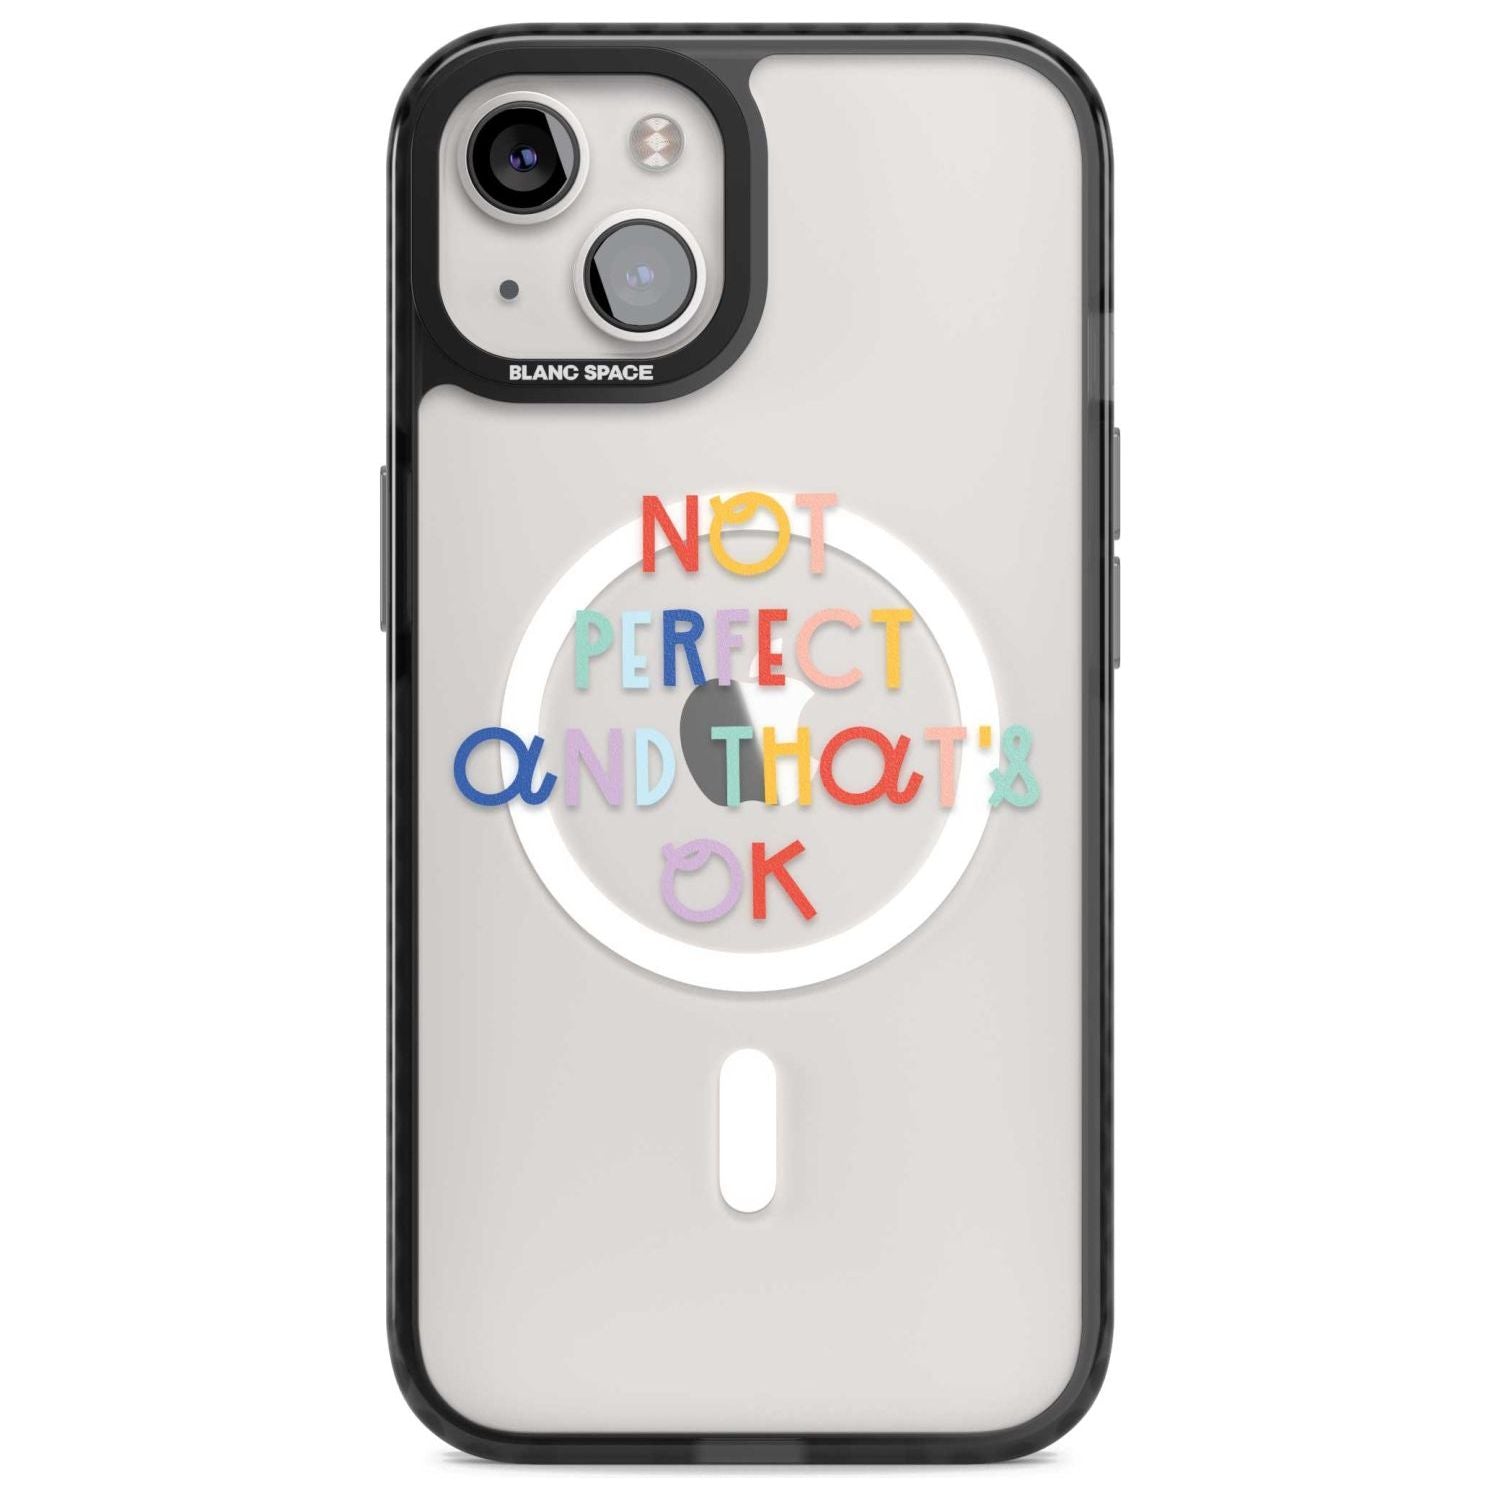 Not Perfect - Clear Phone Case iPhone 15 Plus / Magsafe Black Impact Case,iPhone 15 / Magsafe Black Impact Case,iPhone 14 Plus / Magsafe Black Impact Case,iPhone 14 / Magsafe Black Impact Case,iPhone 13 / Magsafe Black Impact Case Blanc Space